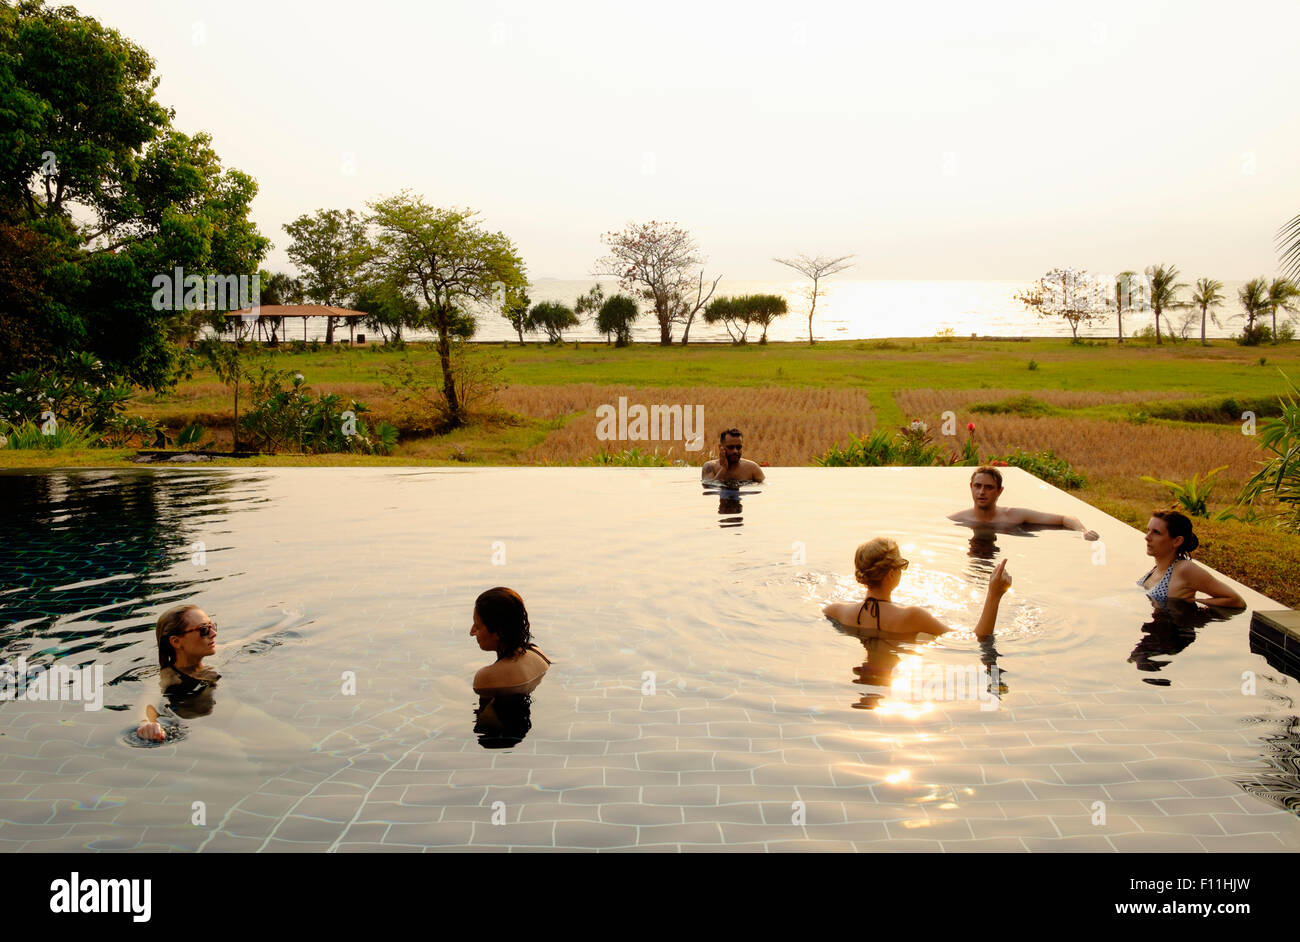 Tourists swimming in infinity pool in remote landscape Stock Photo